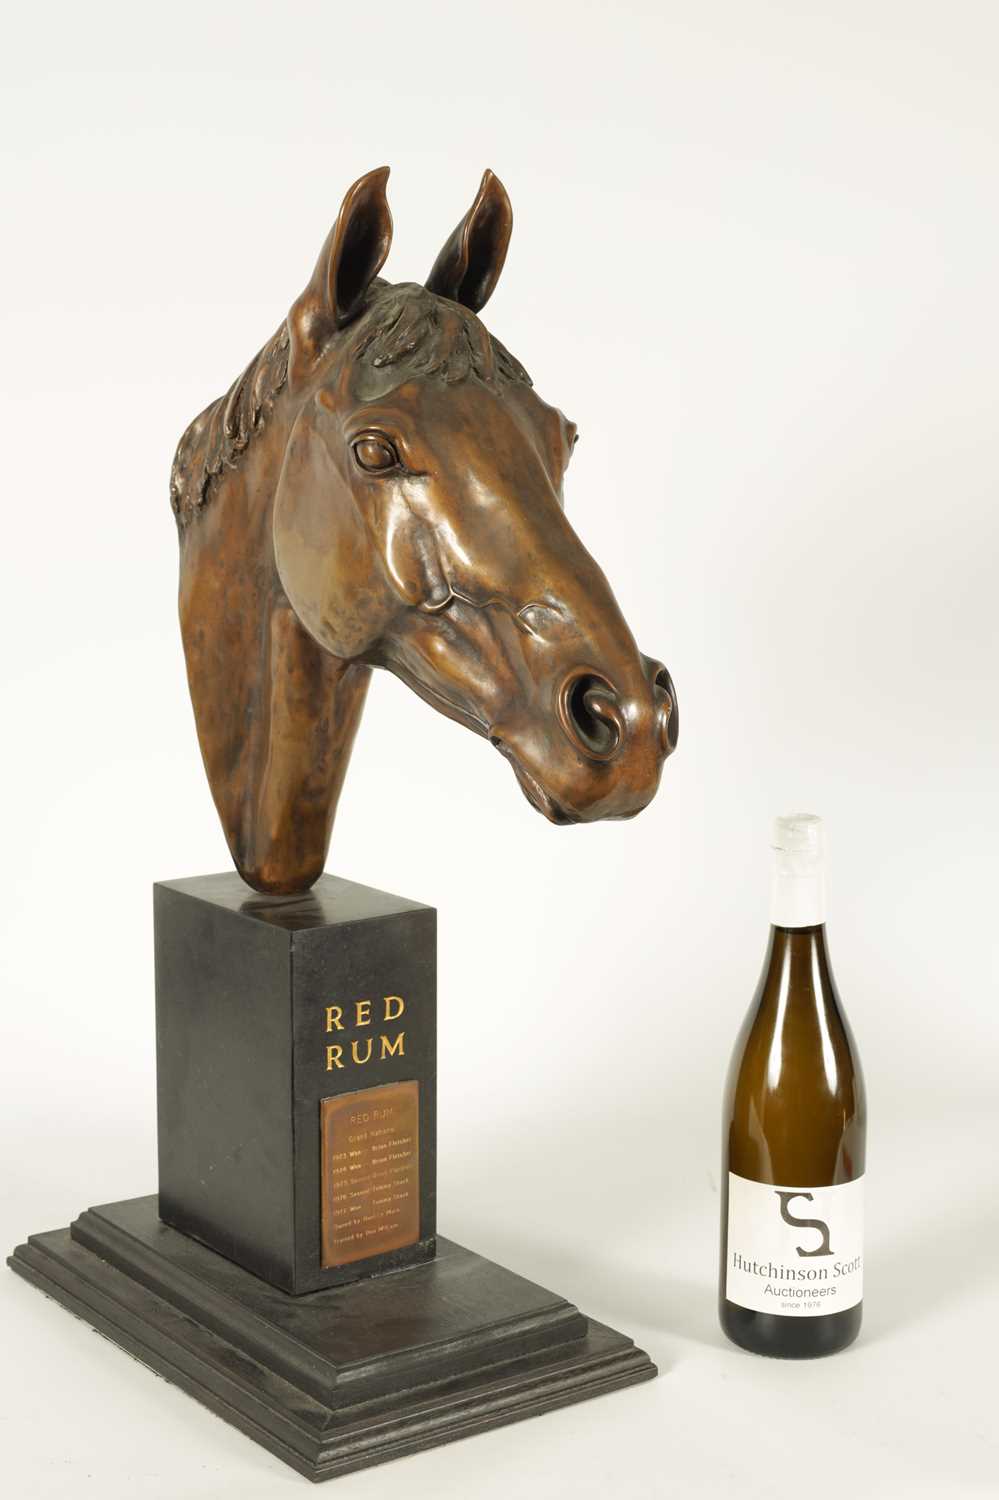 MAUREEN COATMAN. A LARGE LIMITED EDITION BRONZE SCULPTURE OF RED RUM - Image 6 of 13